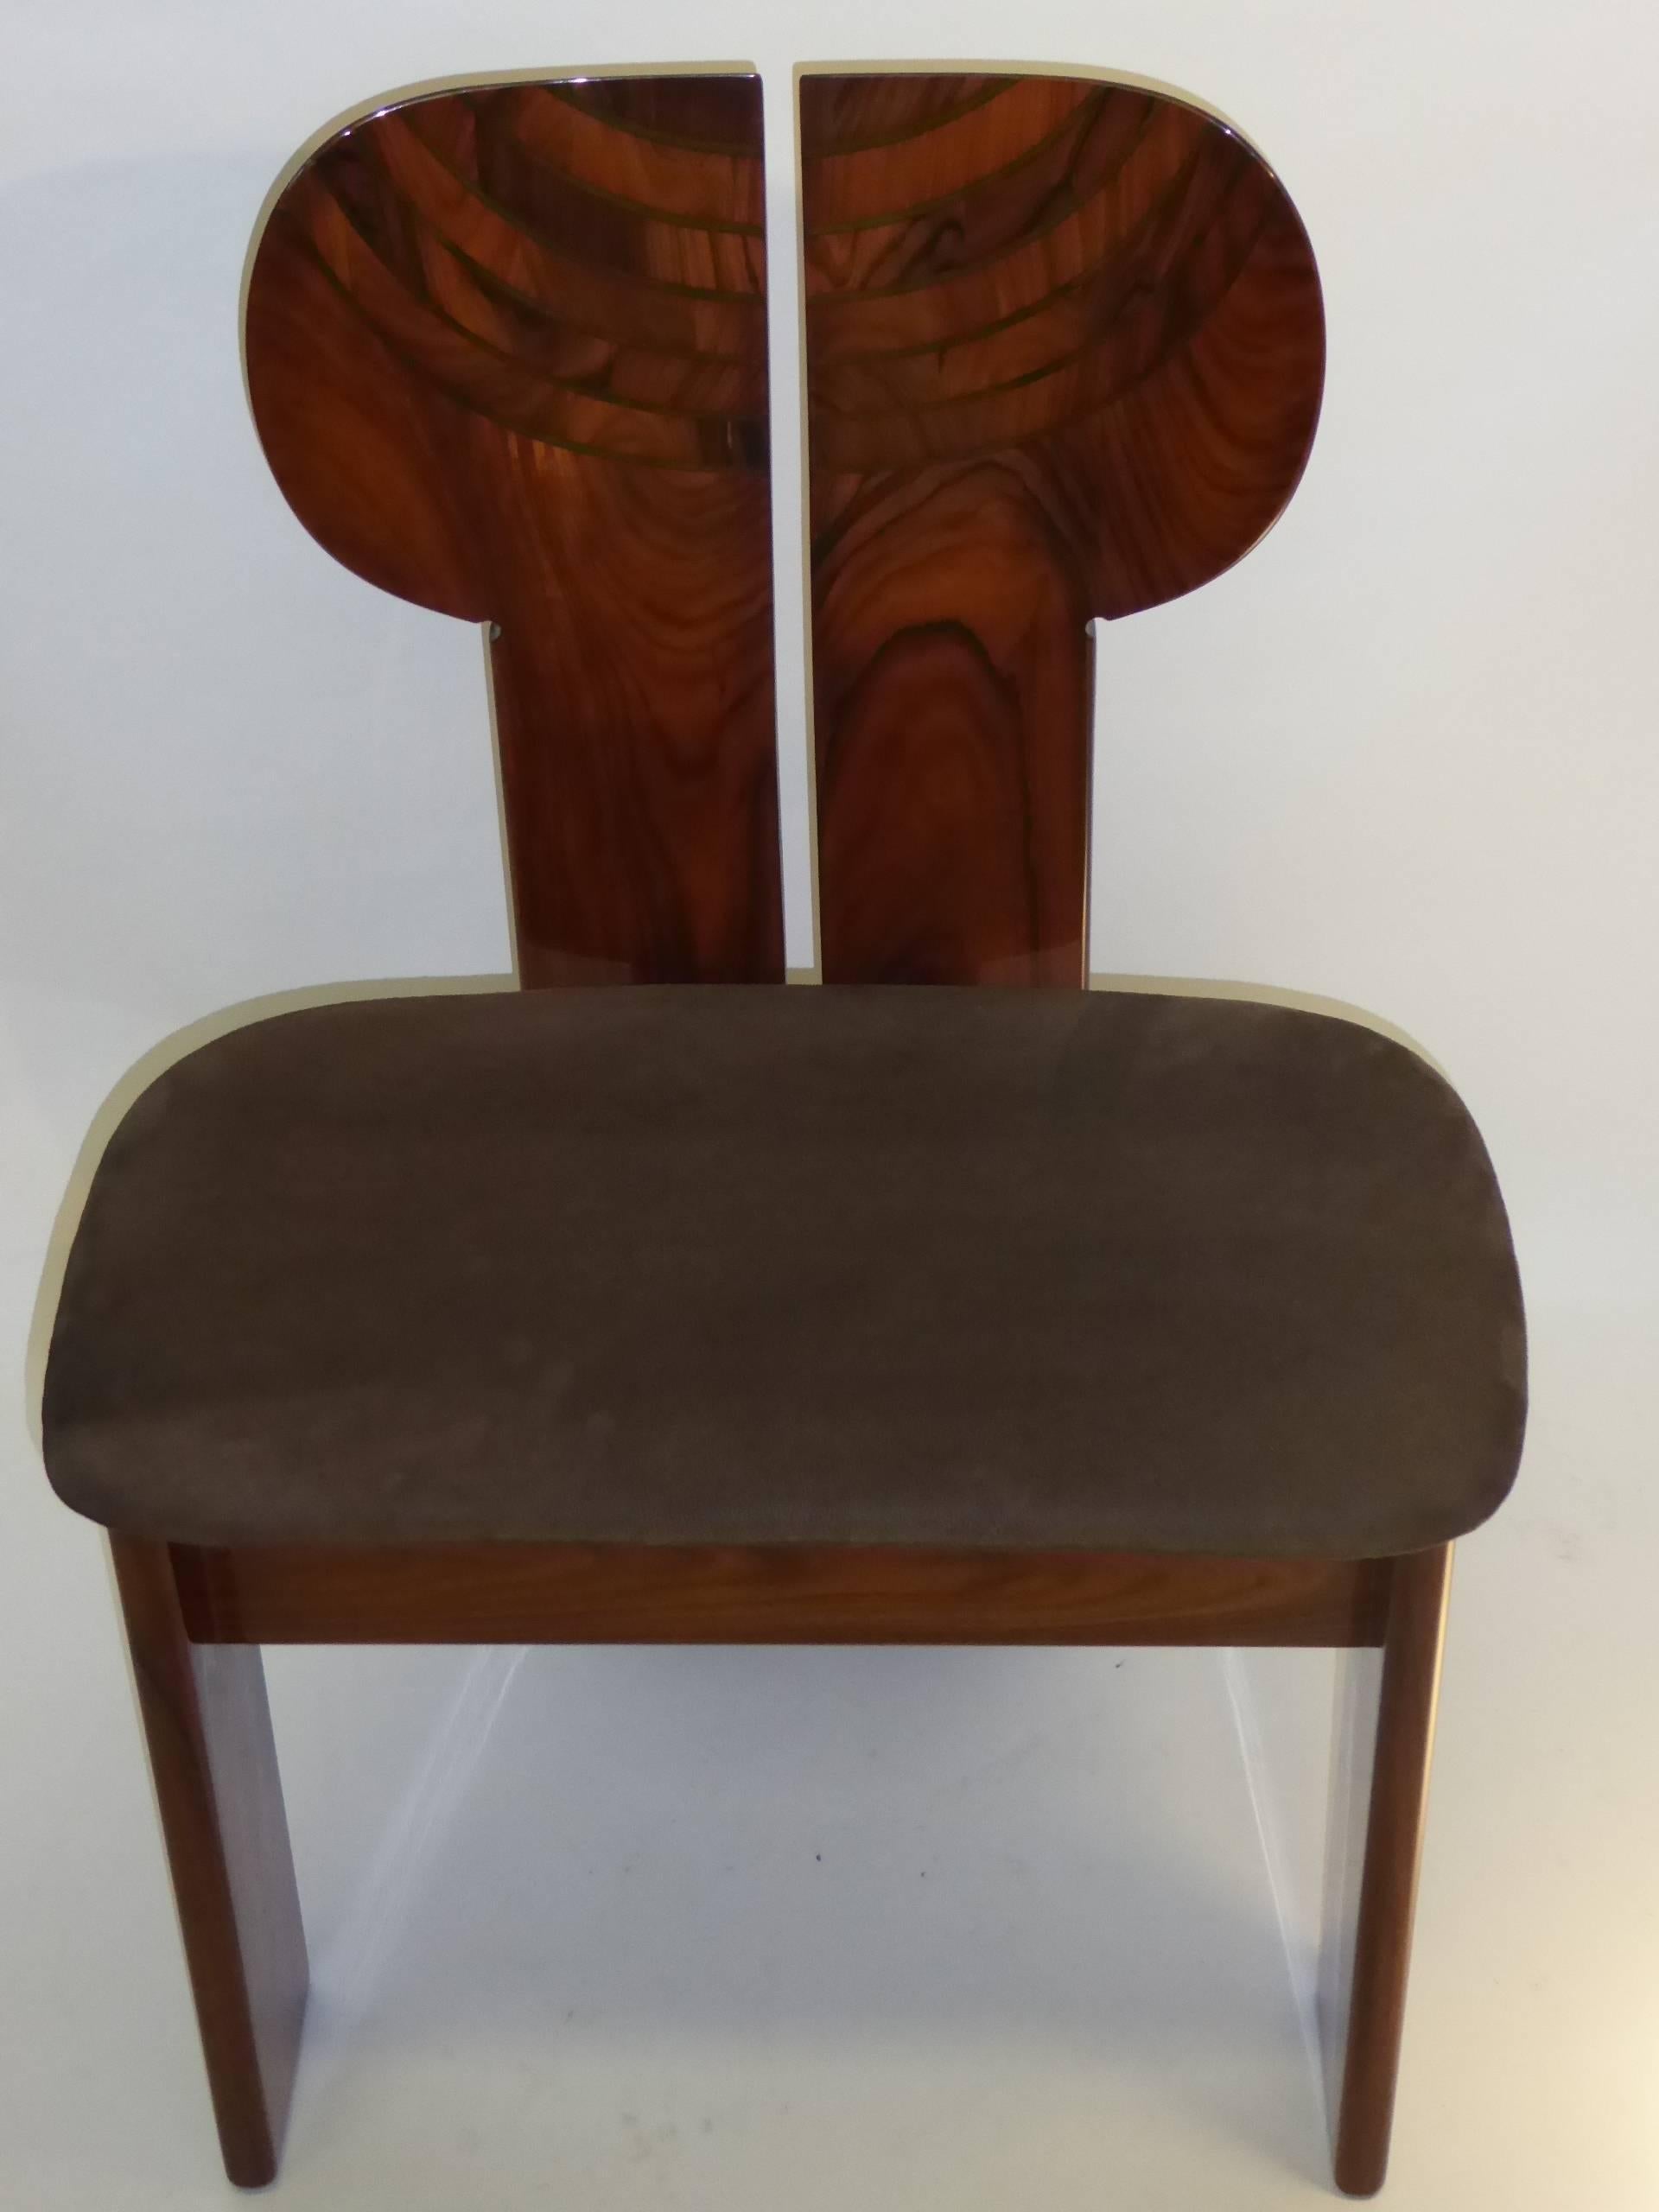 Designed by Afra and Tobia Scarpa, this Africa chair in rosewood or palisander has a suede leather seat.  In excellent condition, it makes a perfect side chair, desk chair, a work of art.

The Africa chair from the  Artona series was designed in